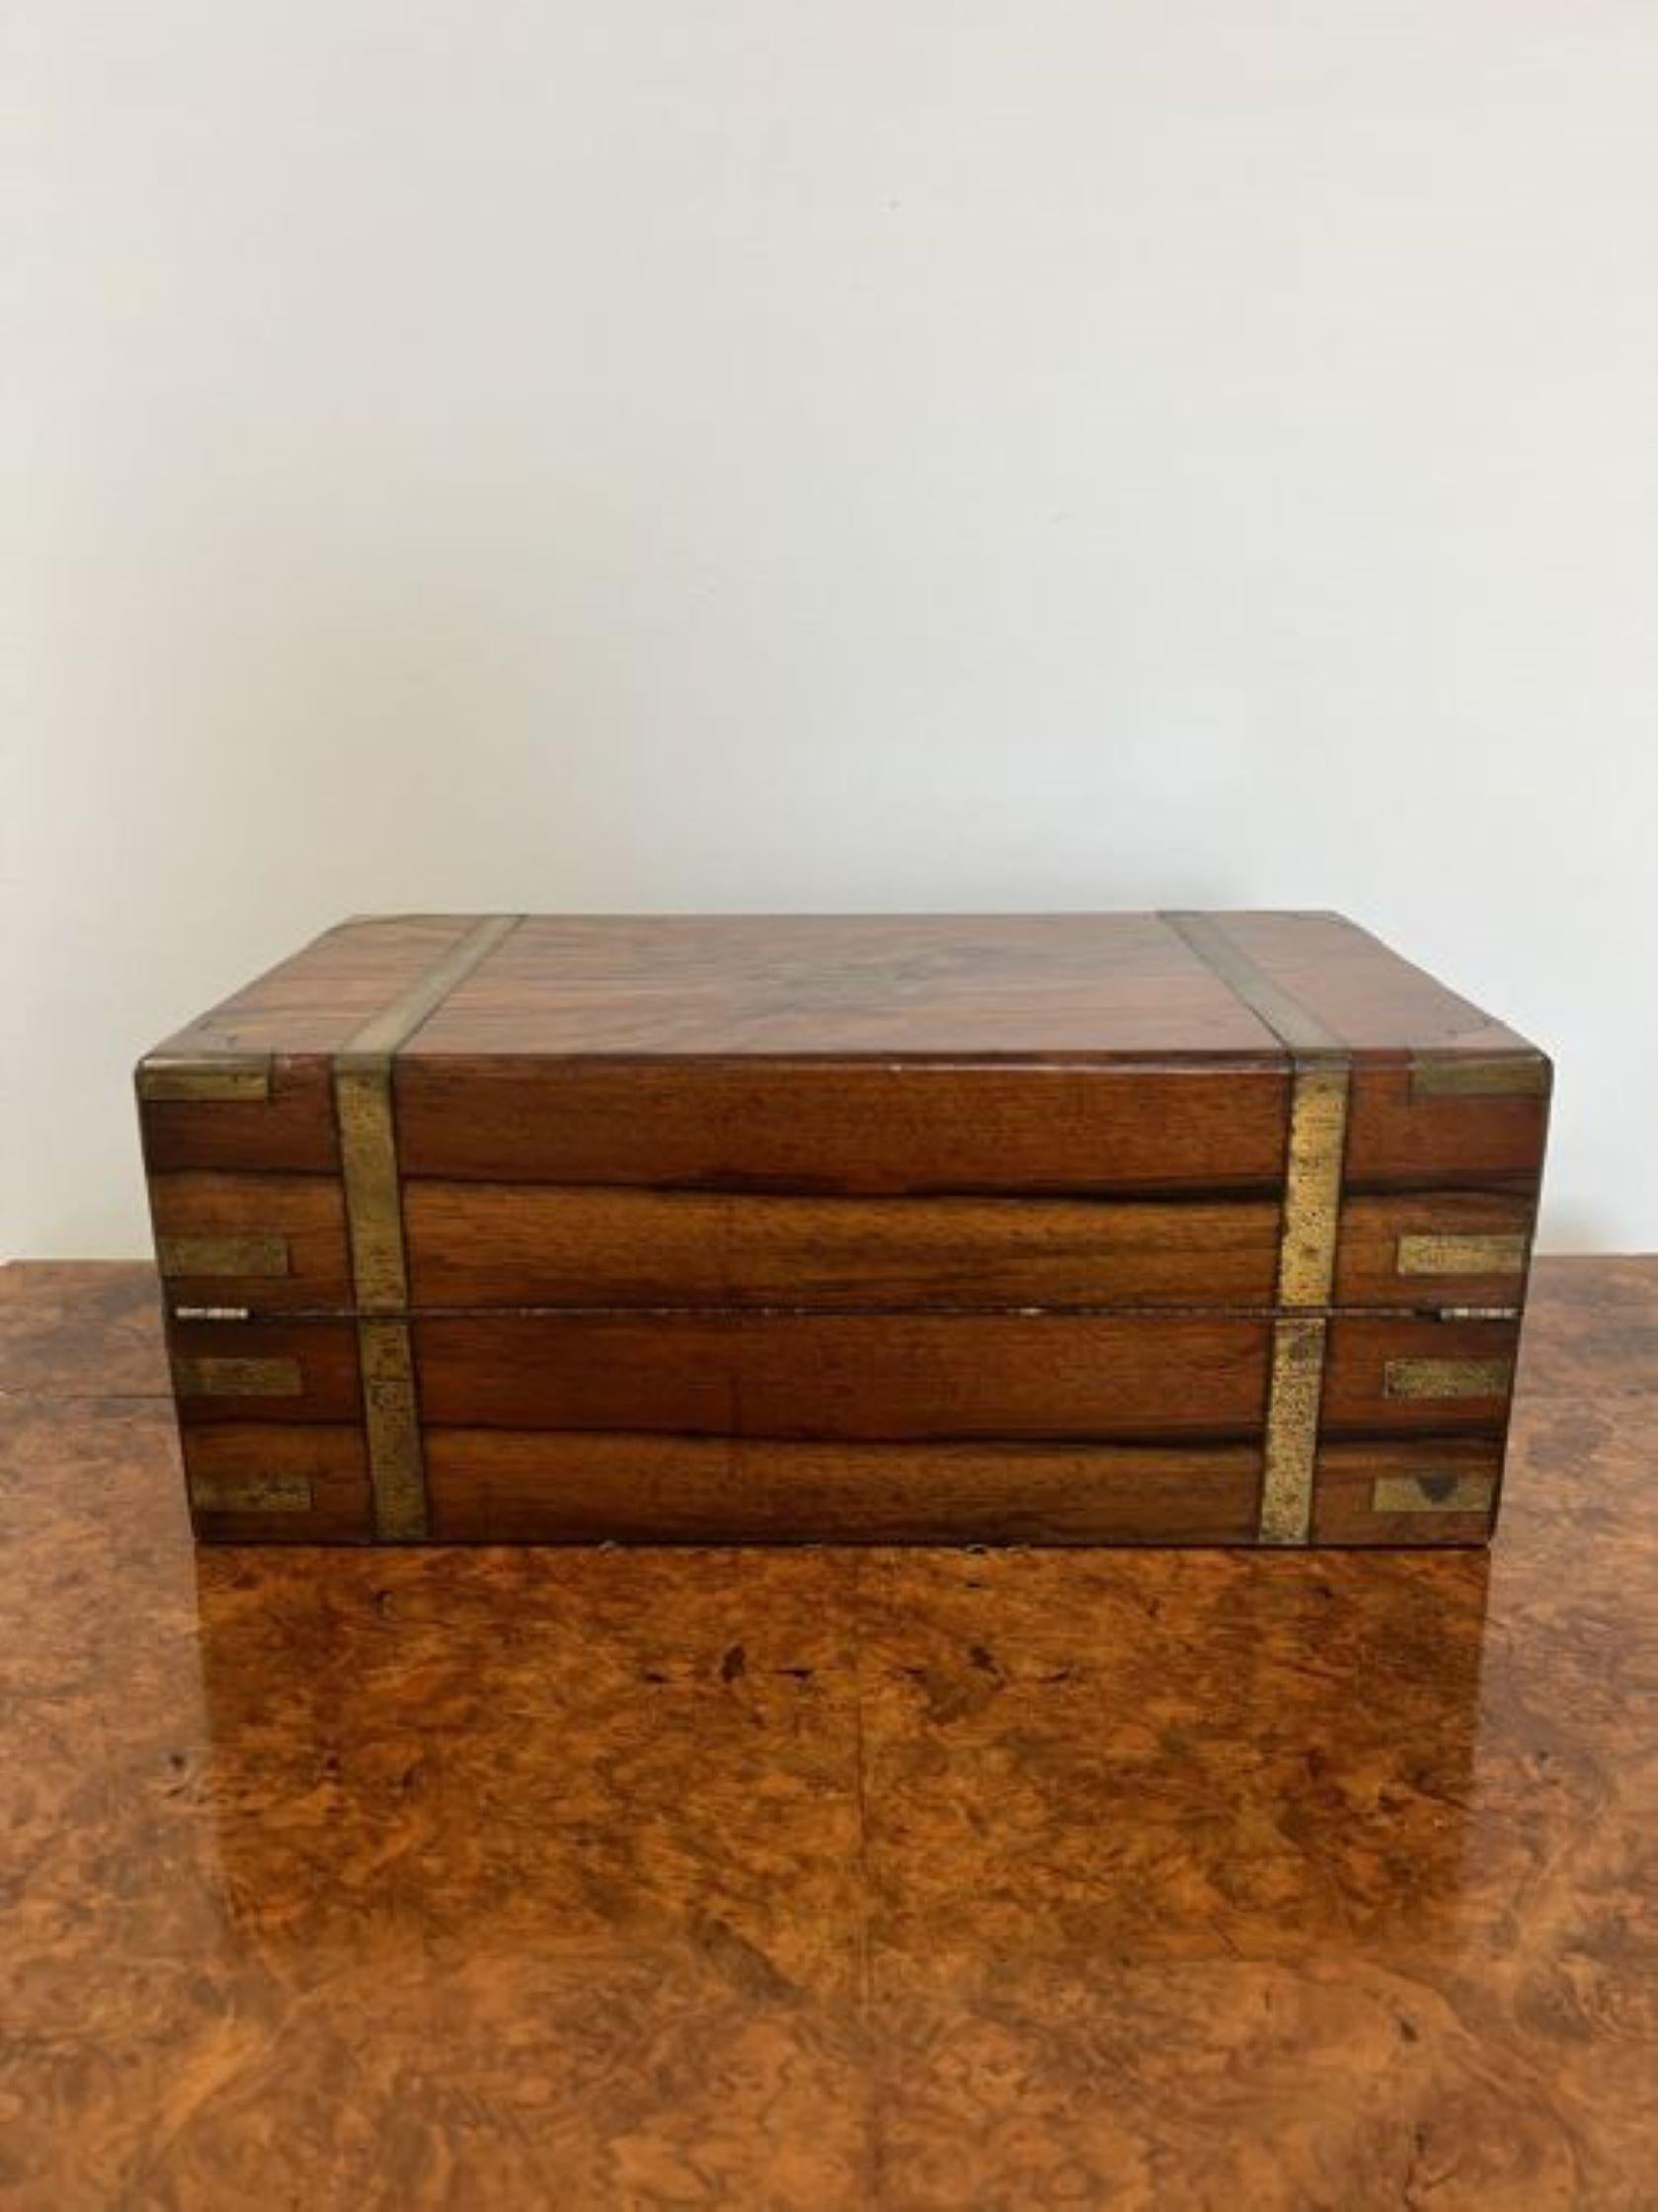 Antique Victorian quality burr walnut and brass bound writing box having a quality burr walnut writing box with brass bounds and corners opening up to reveal a writing slope with original navy leather, lifting up to reveal a storage compartment and